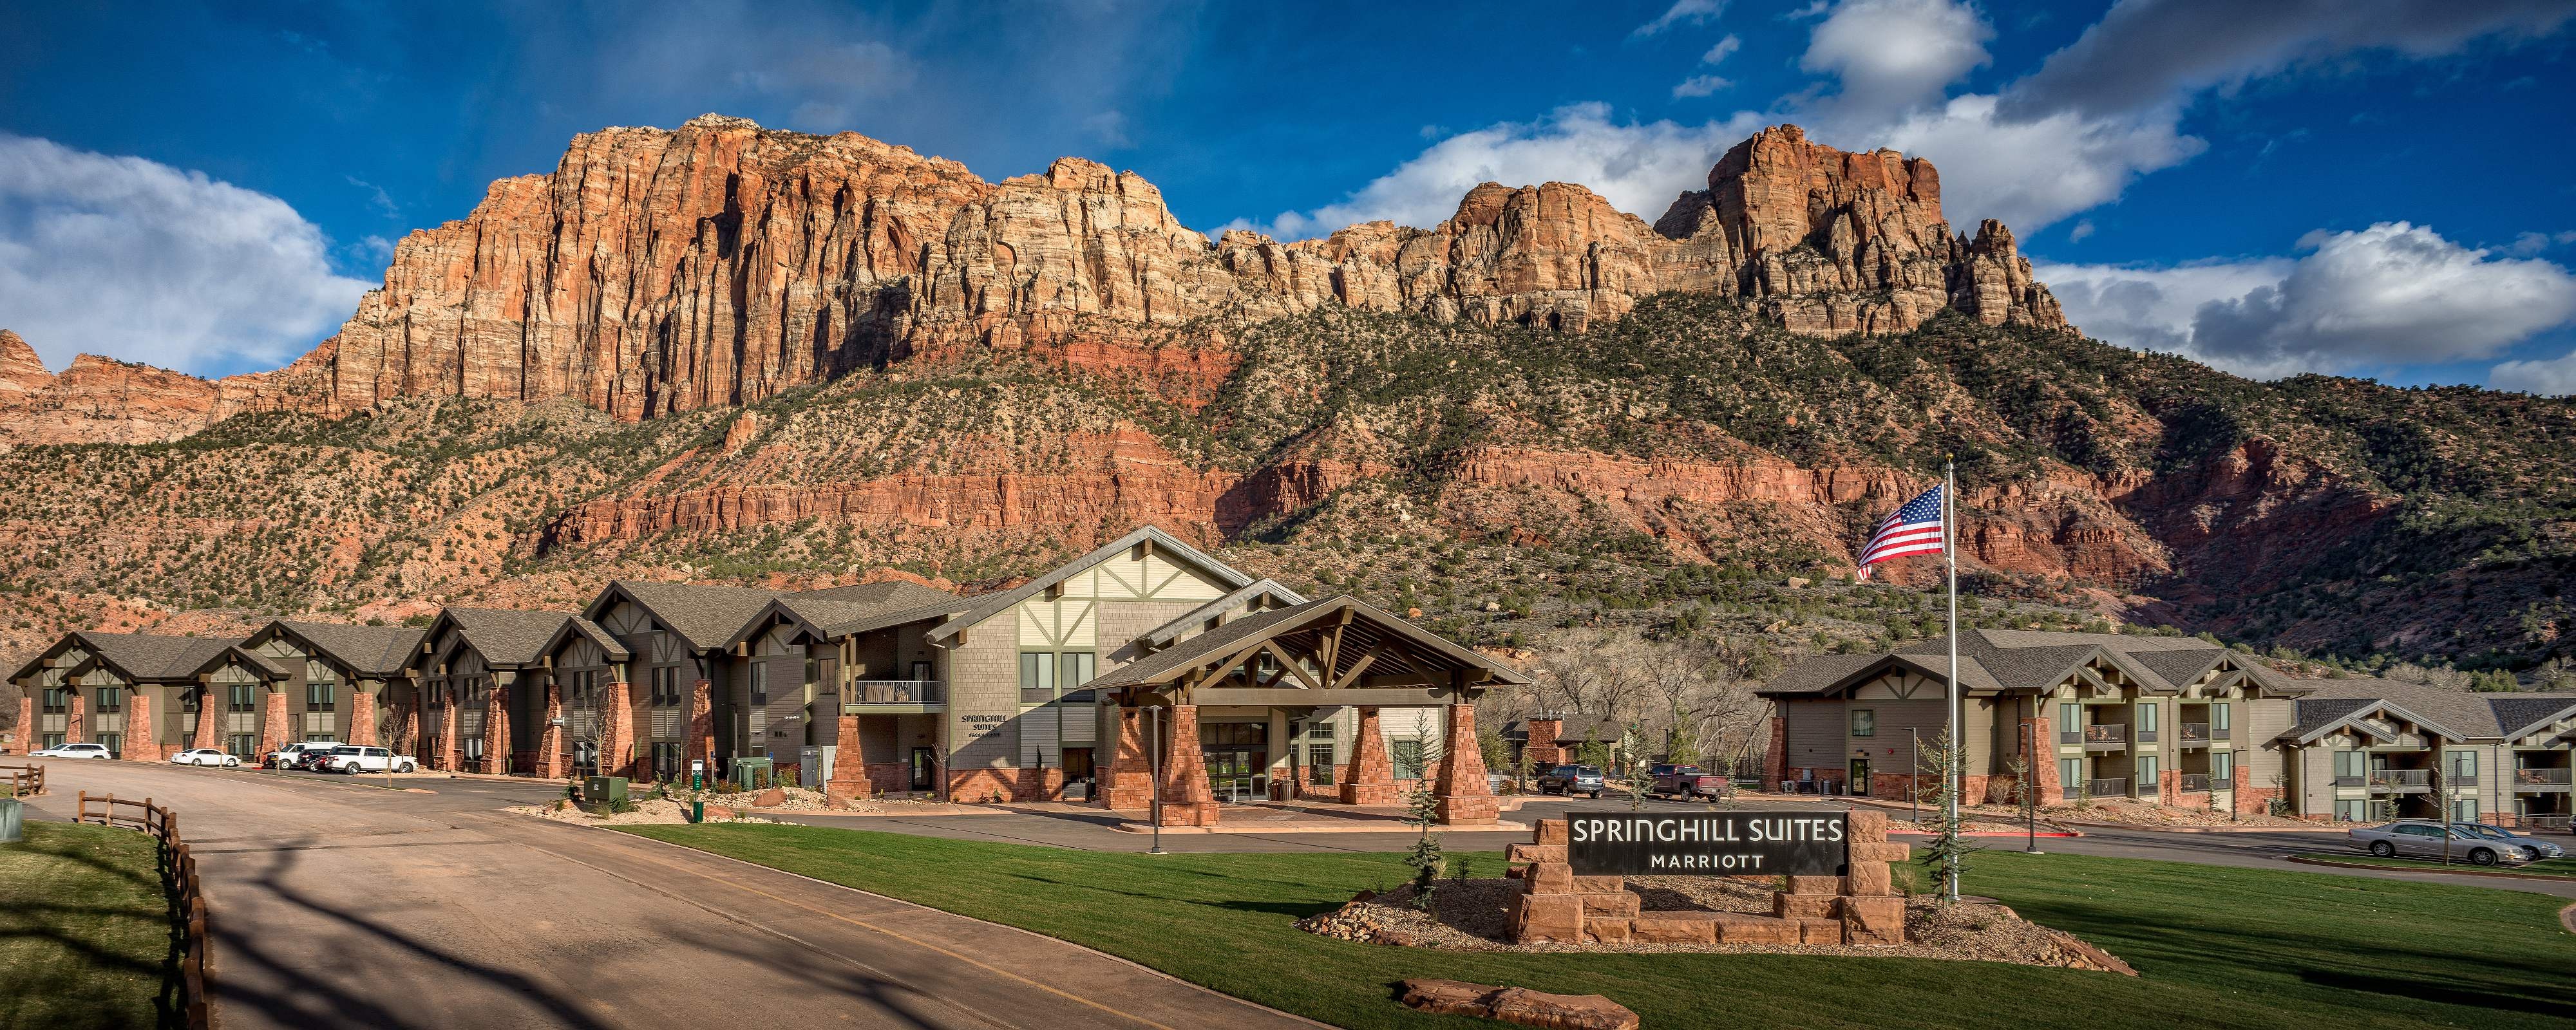 Where Is The Closest Airport To Zion National Park?